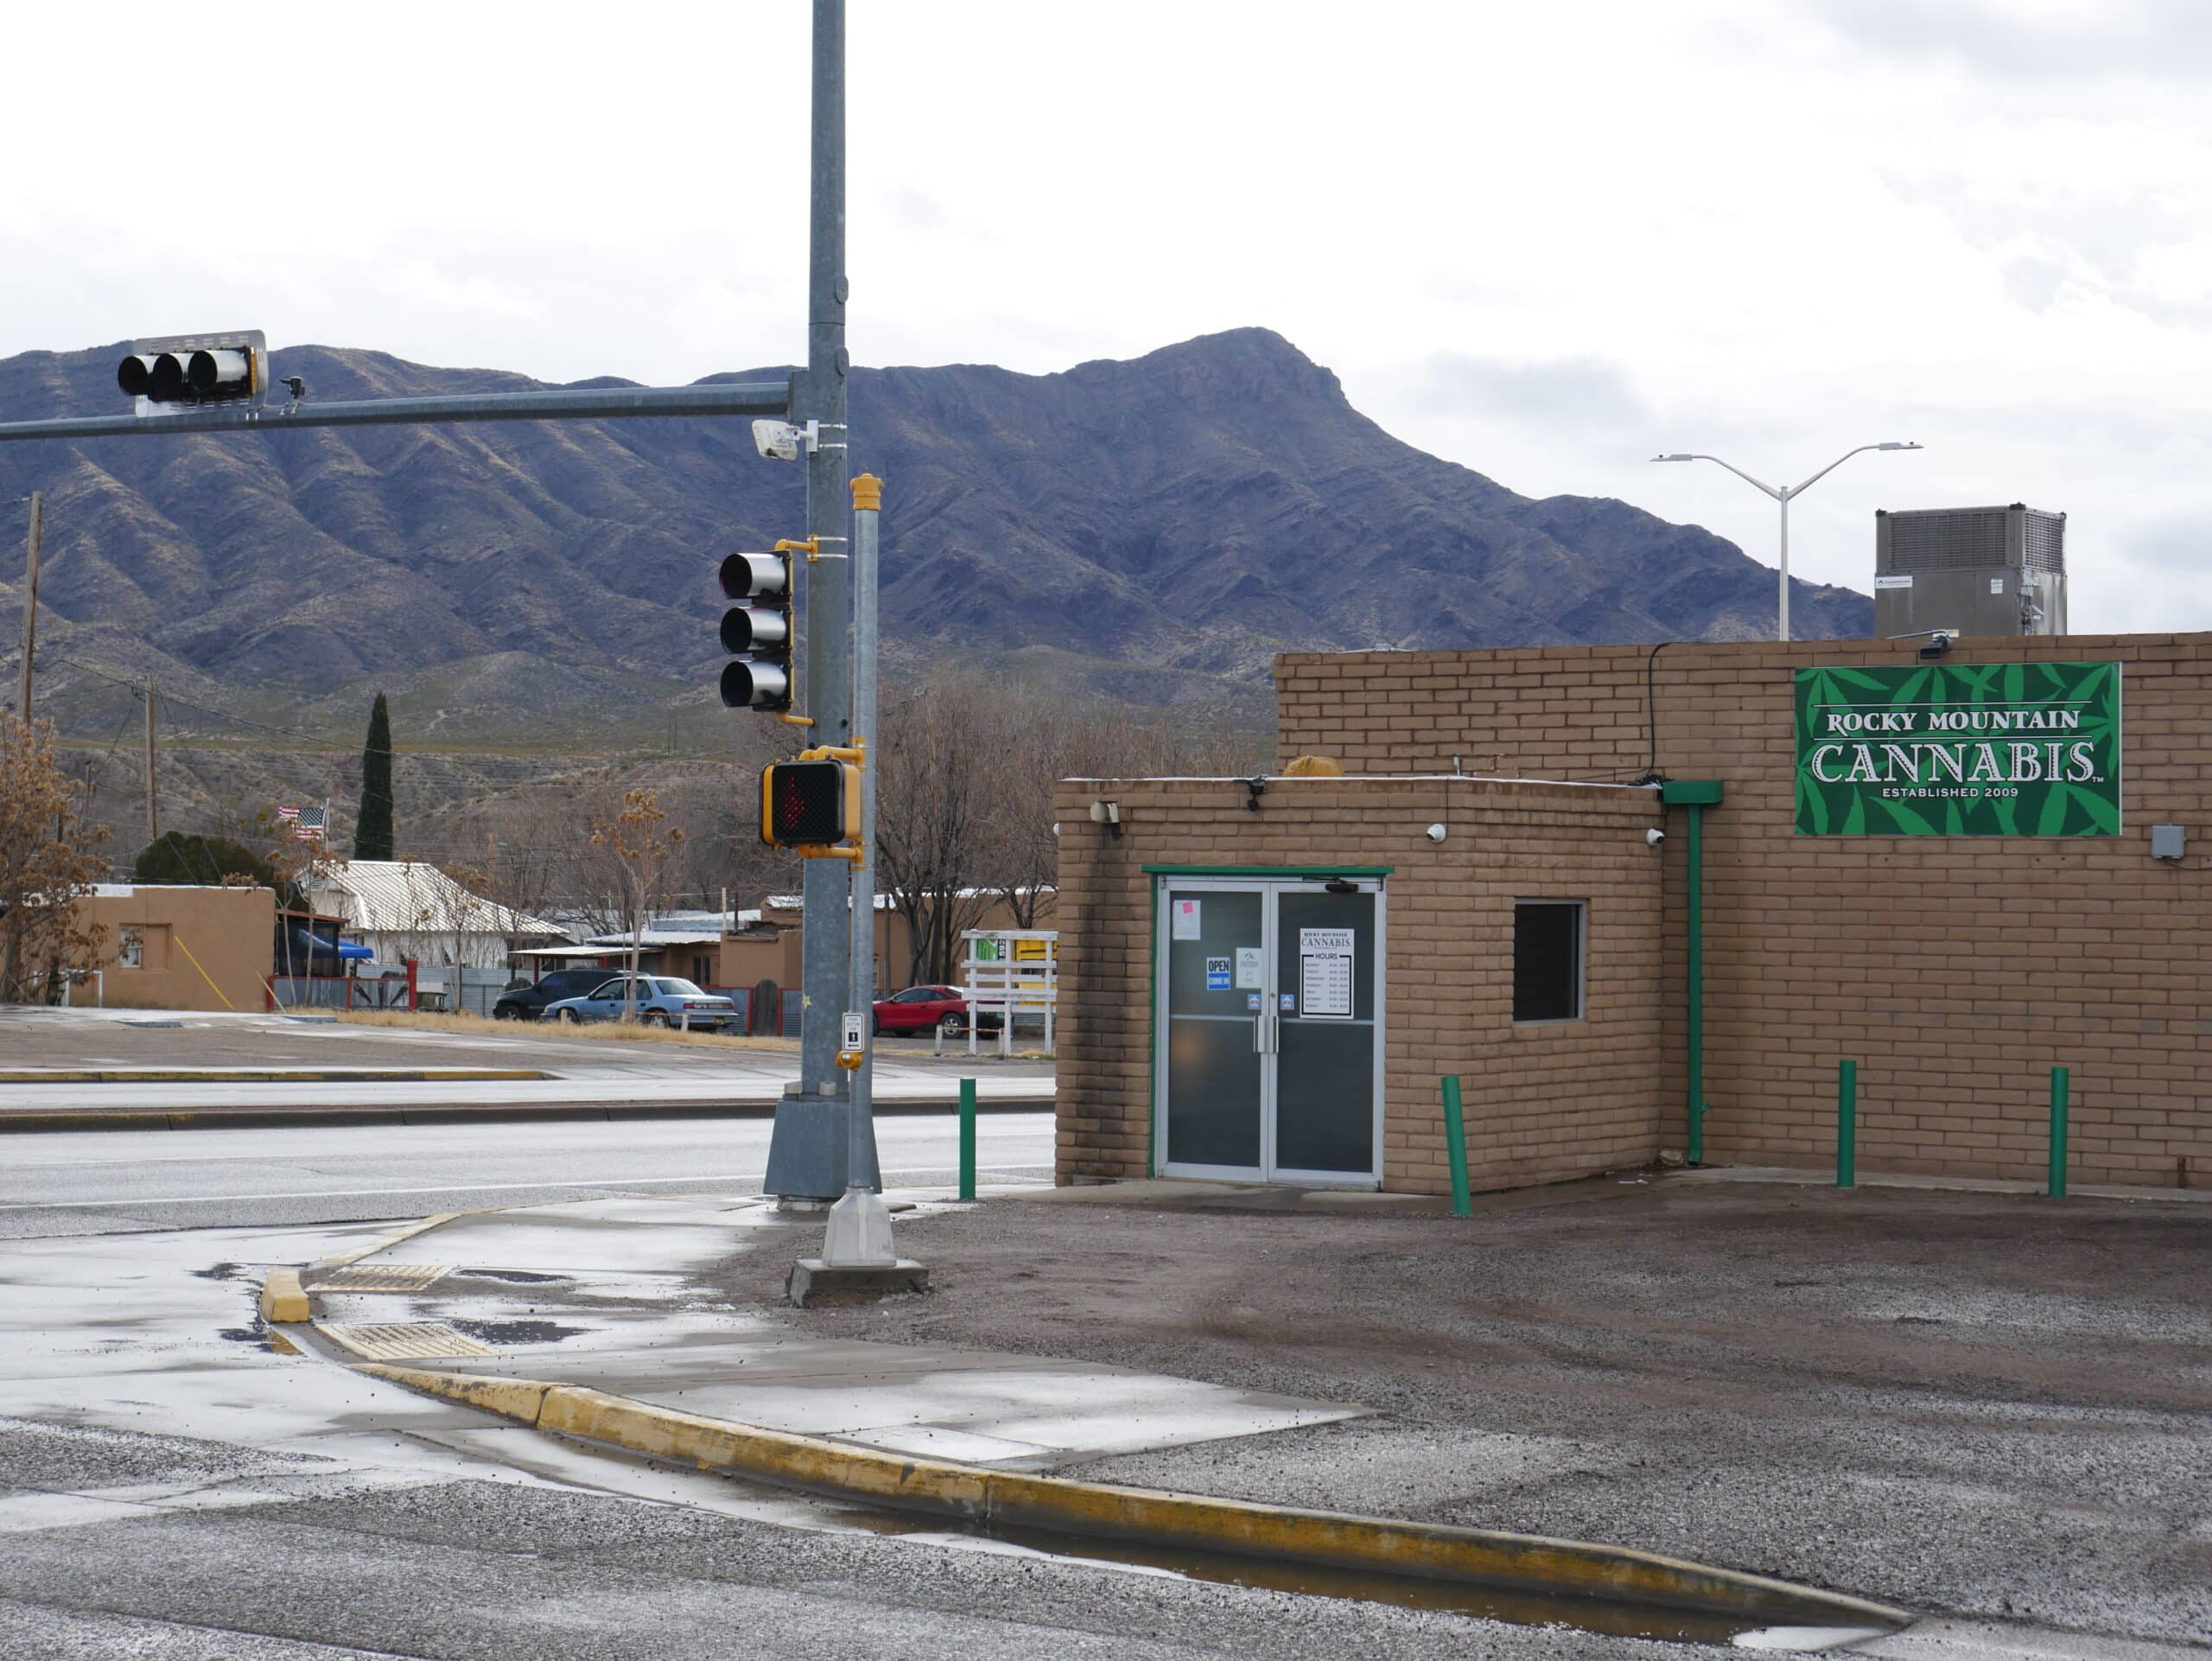 Premium Cannabis Dispensary Truth Or Consequences New Mexico